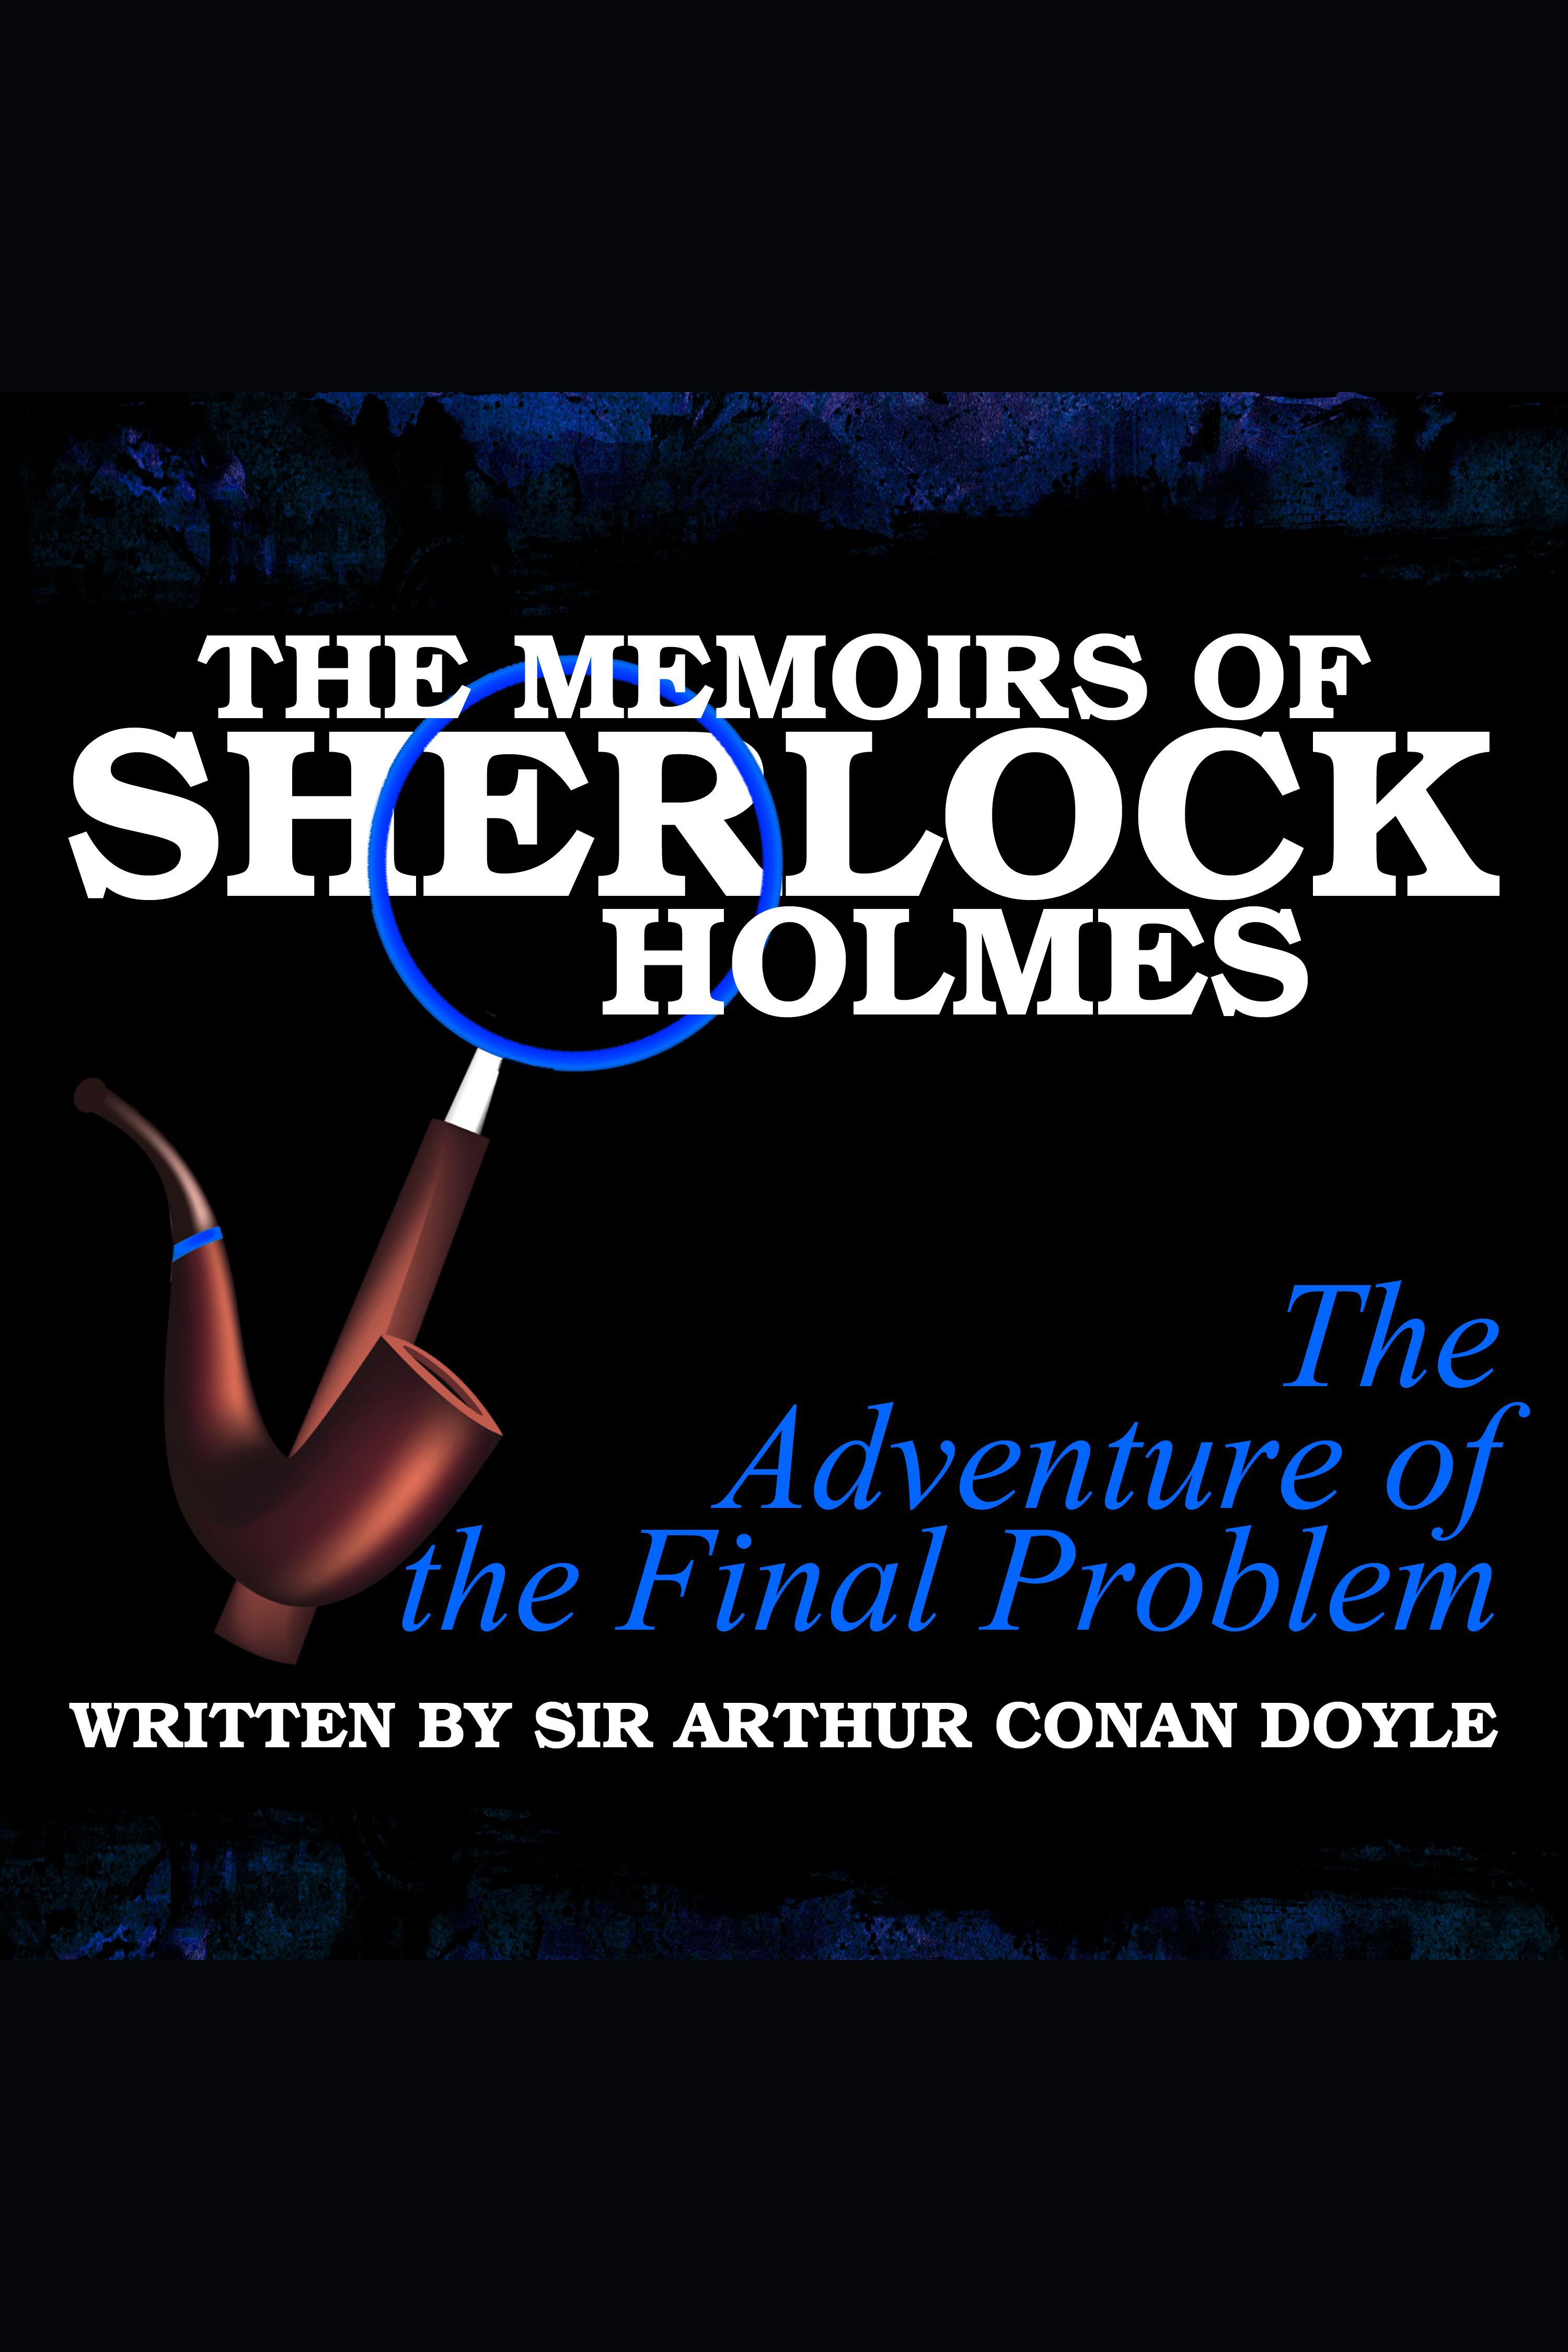 The Memoirs of Sherlock Holmes - The Adventure of the Final Problem cover image